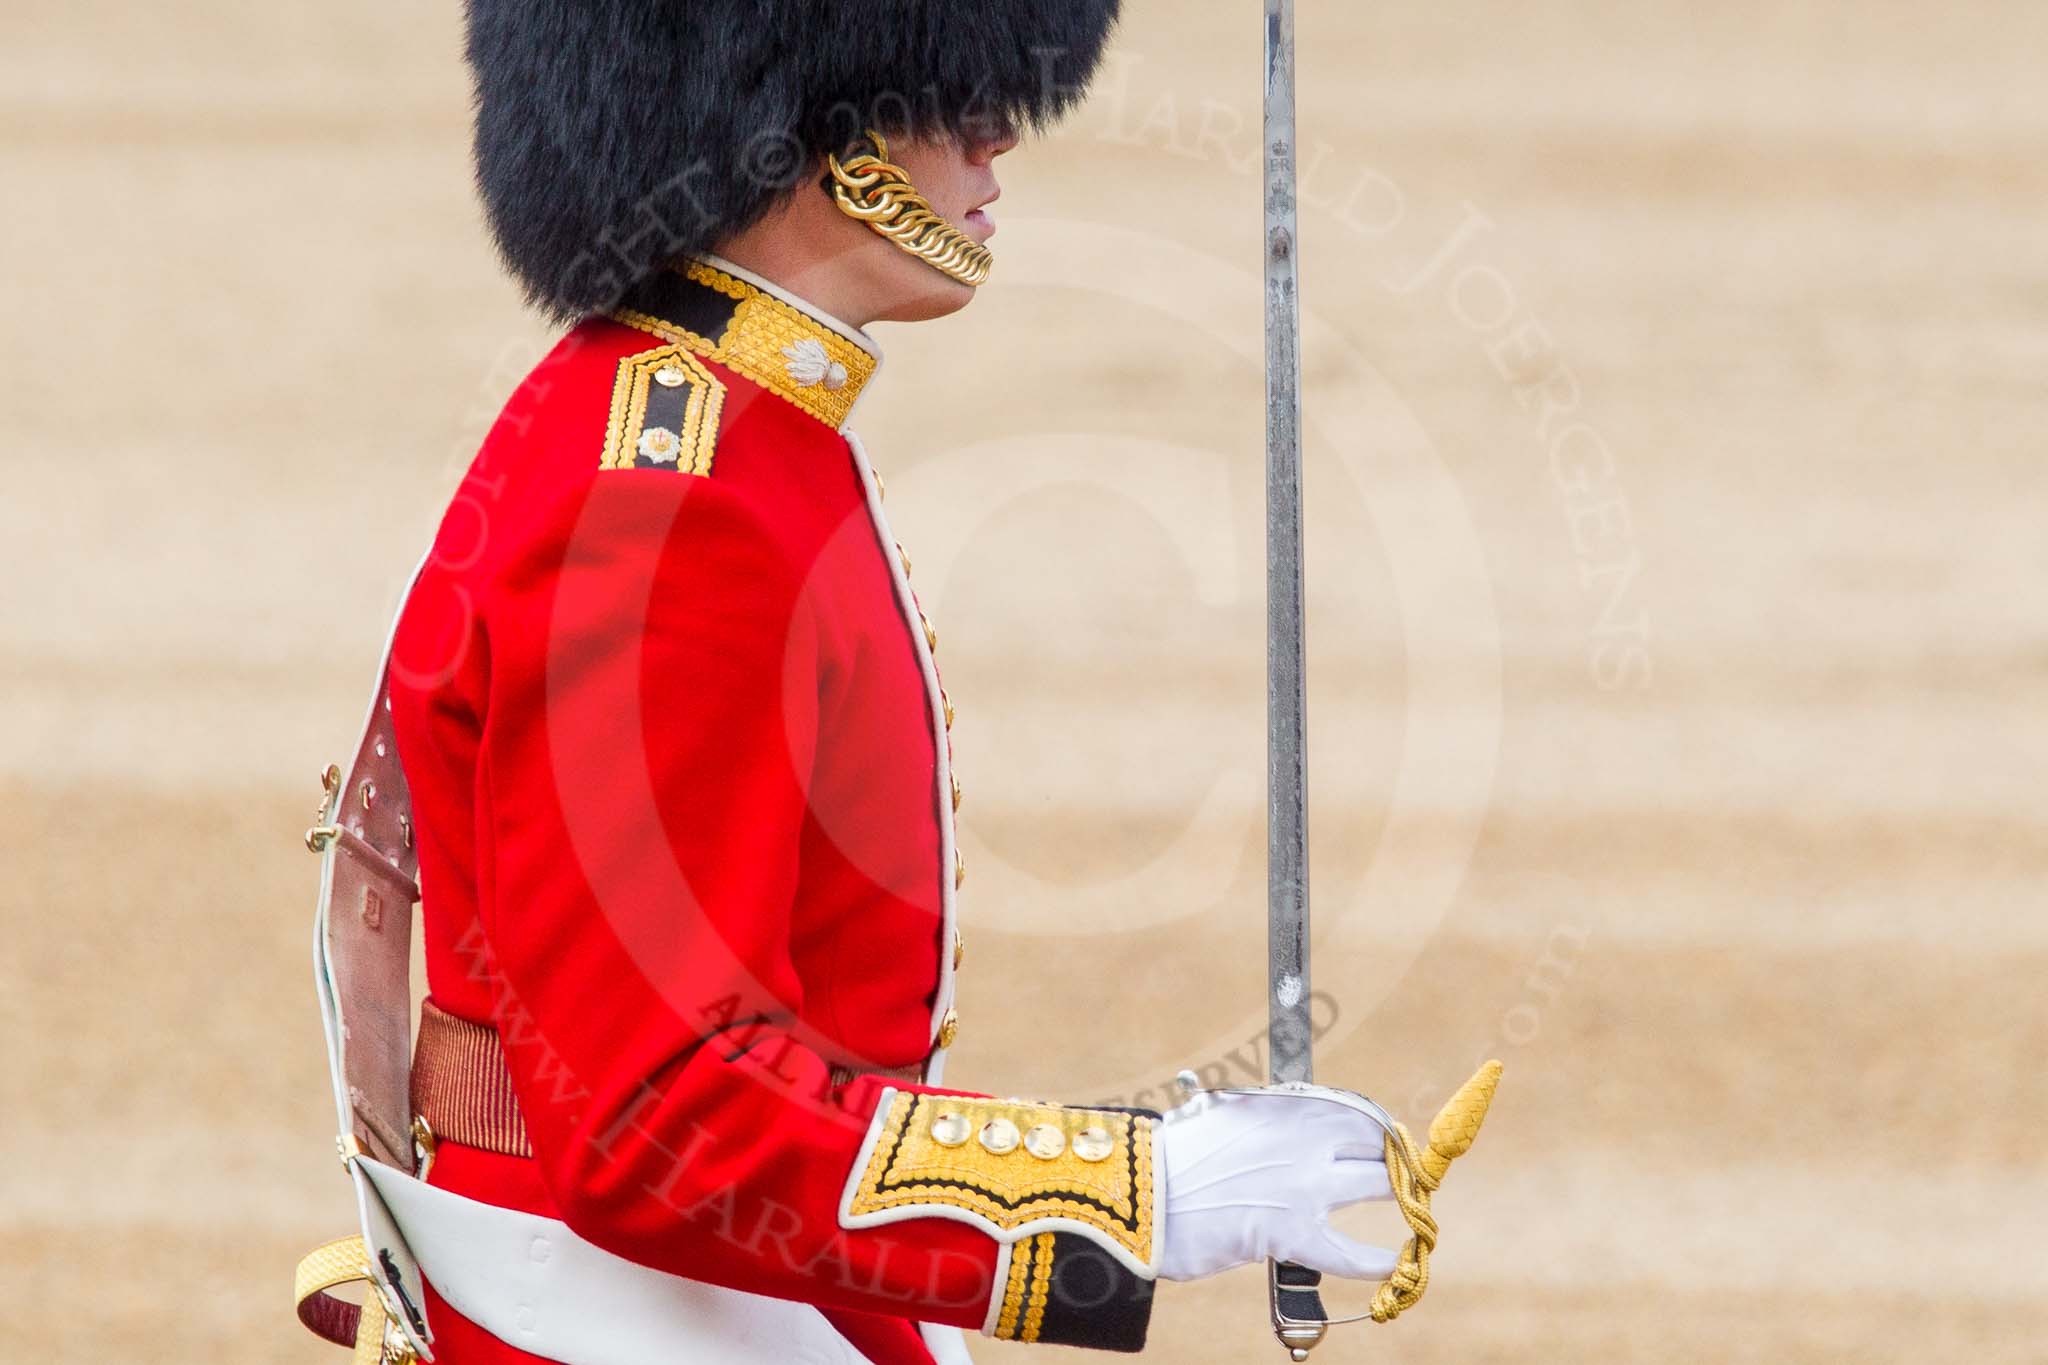 Trooping the Colour 2014.
Horse Guards Parade, Westminster,
London SW1A,

United Kingdom,
on 14 June 2014 at 11:18, image #509